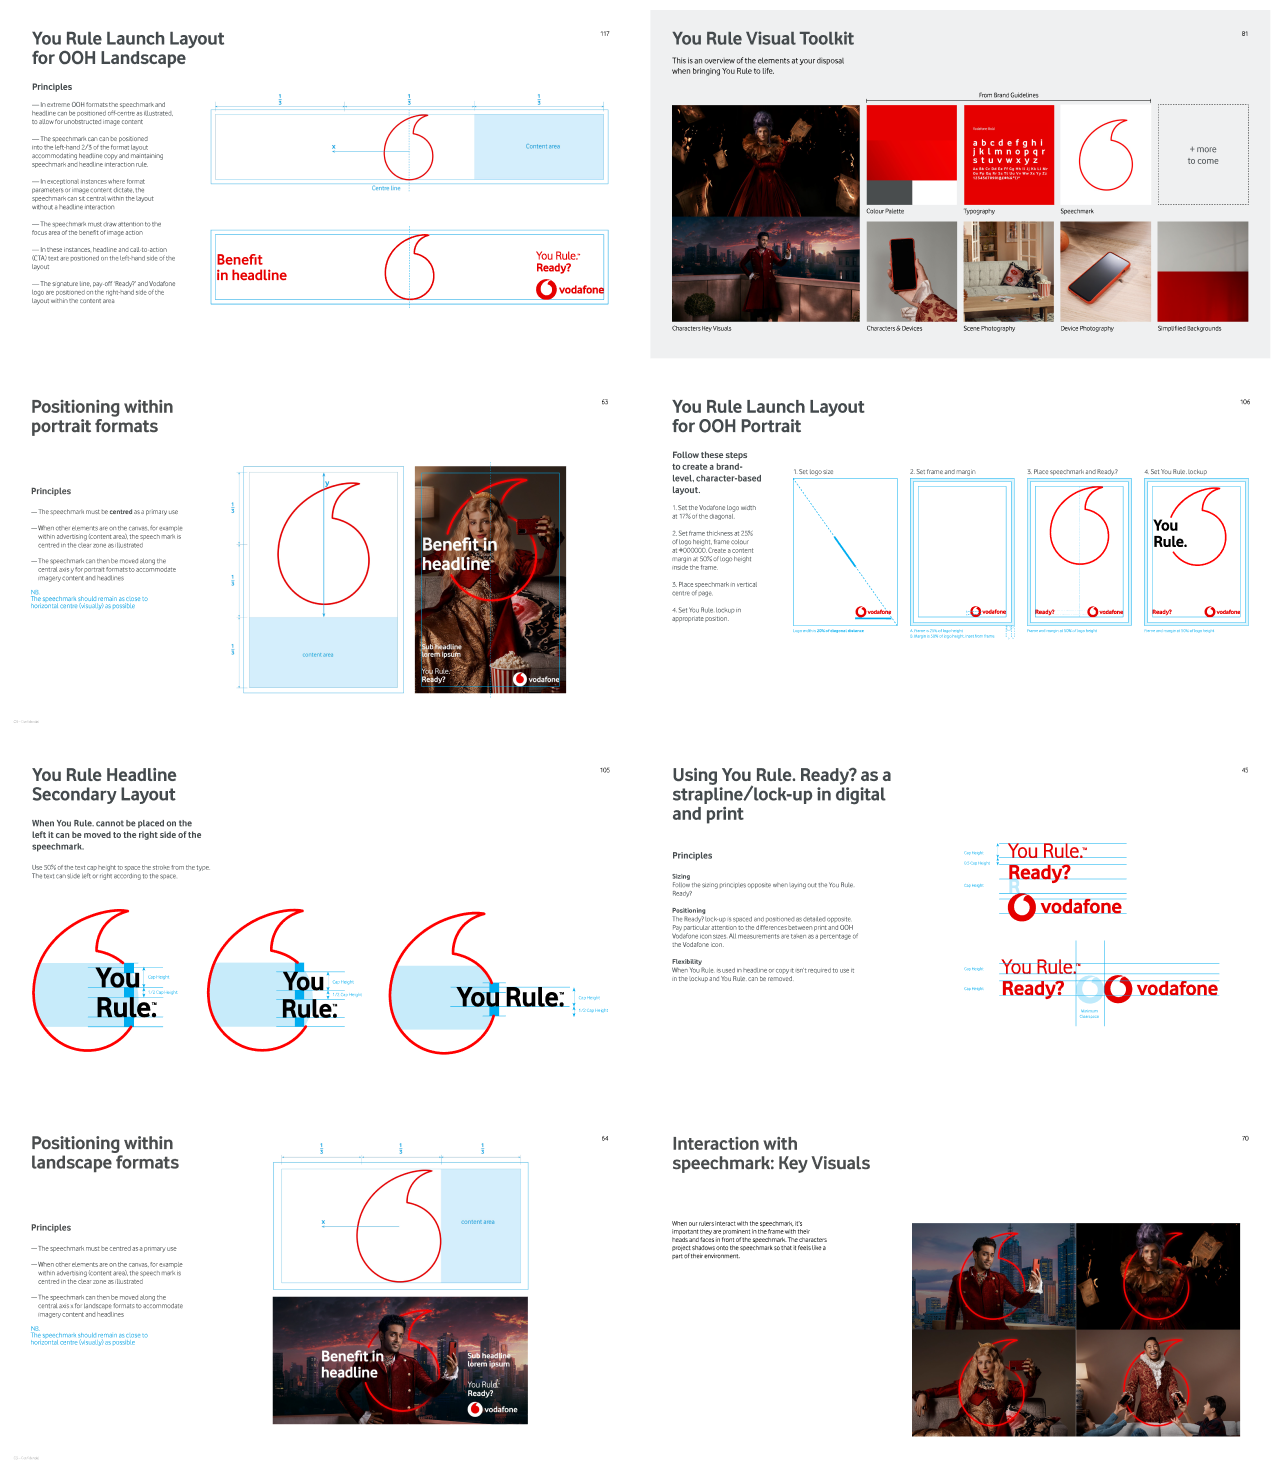 vodafone-playbook-pages-2-1